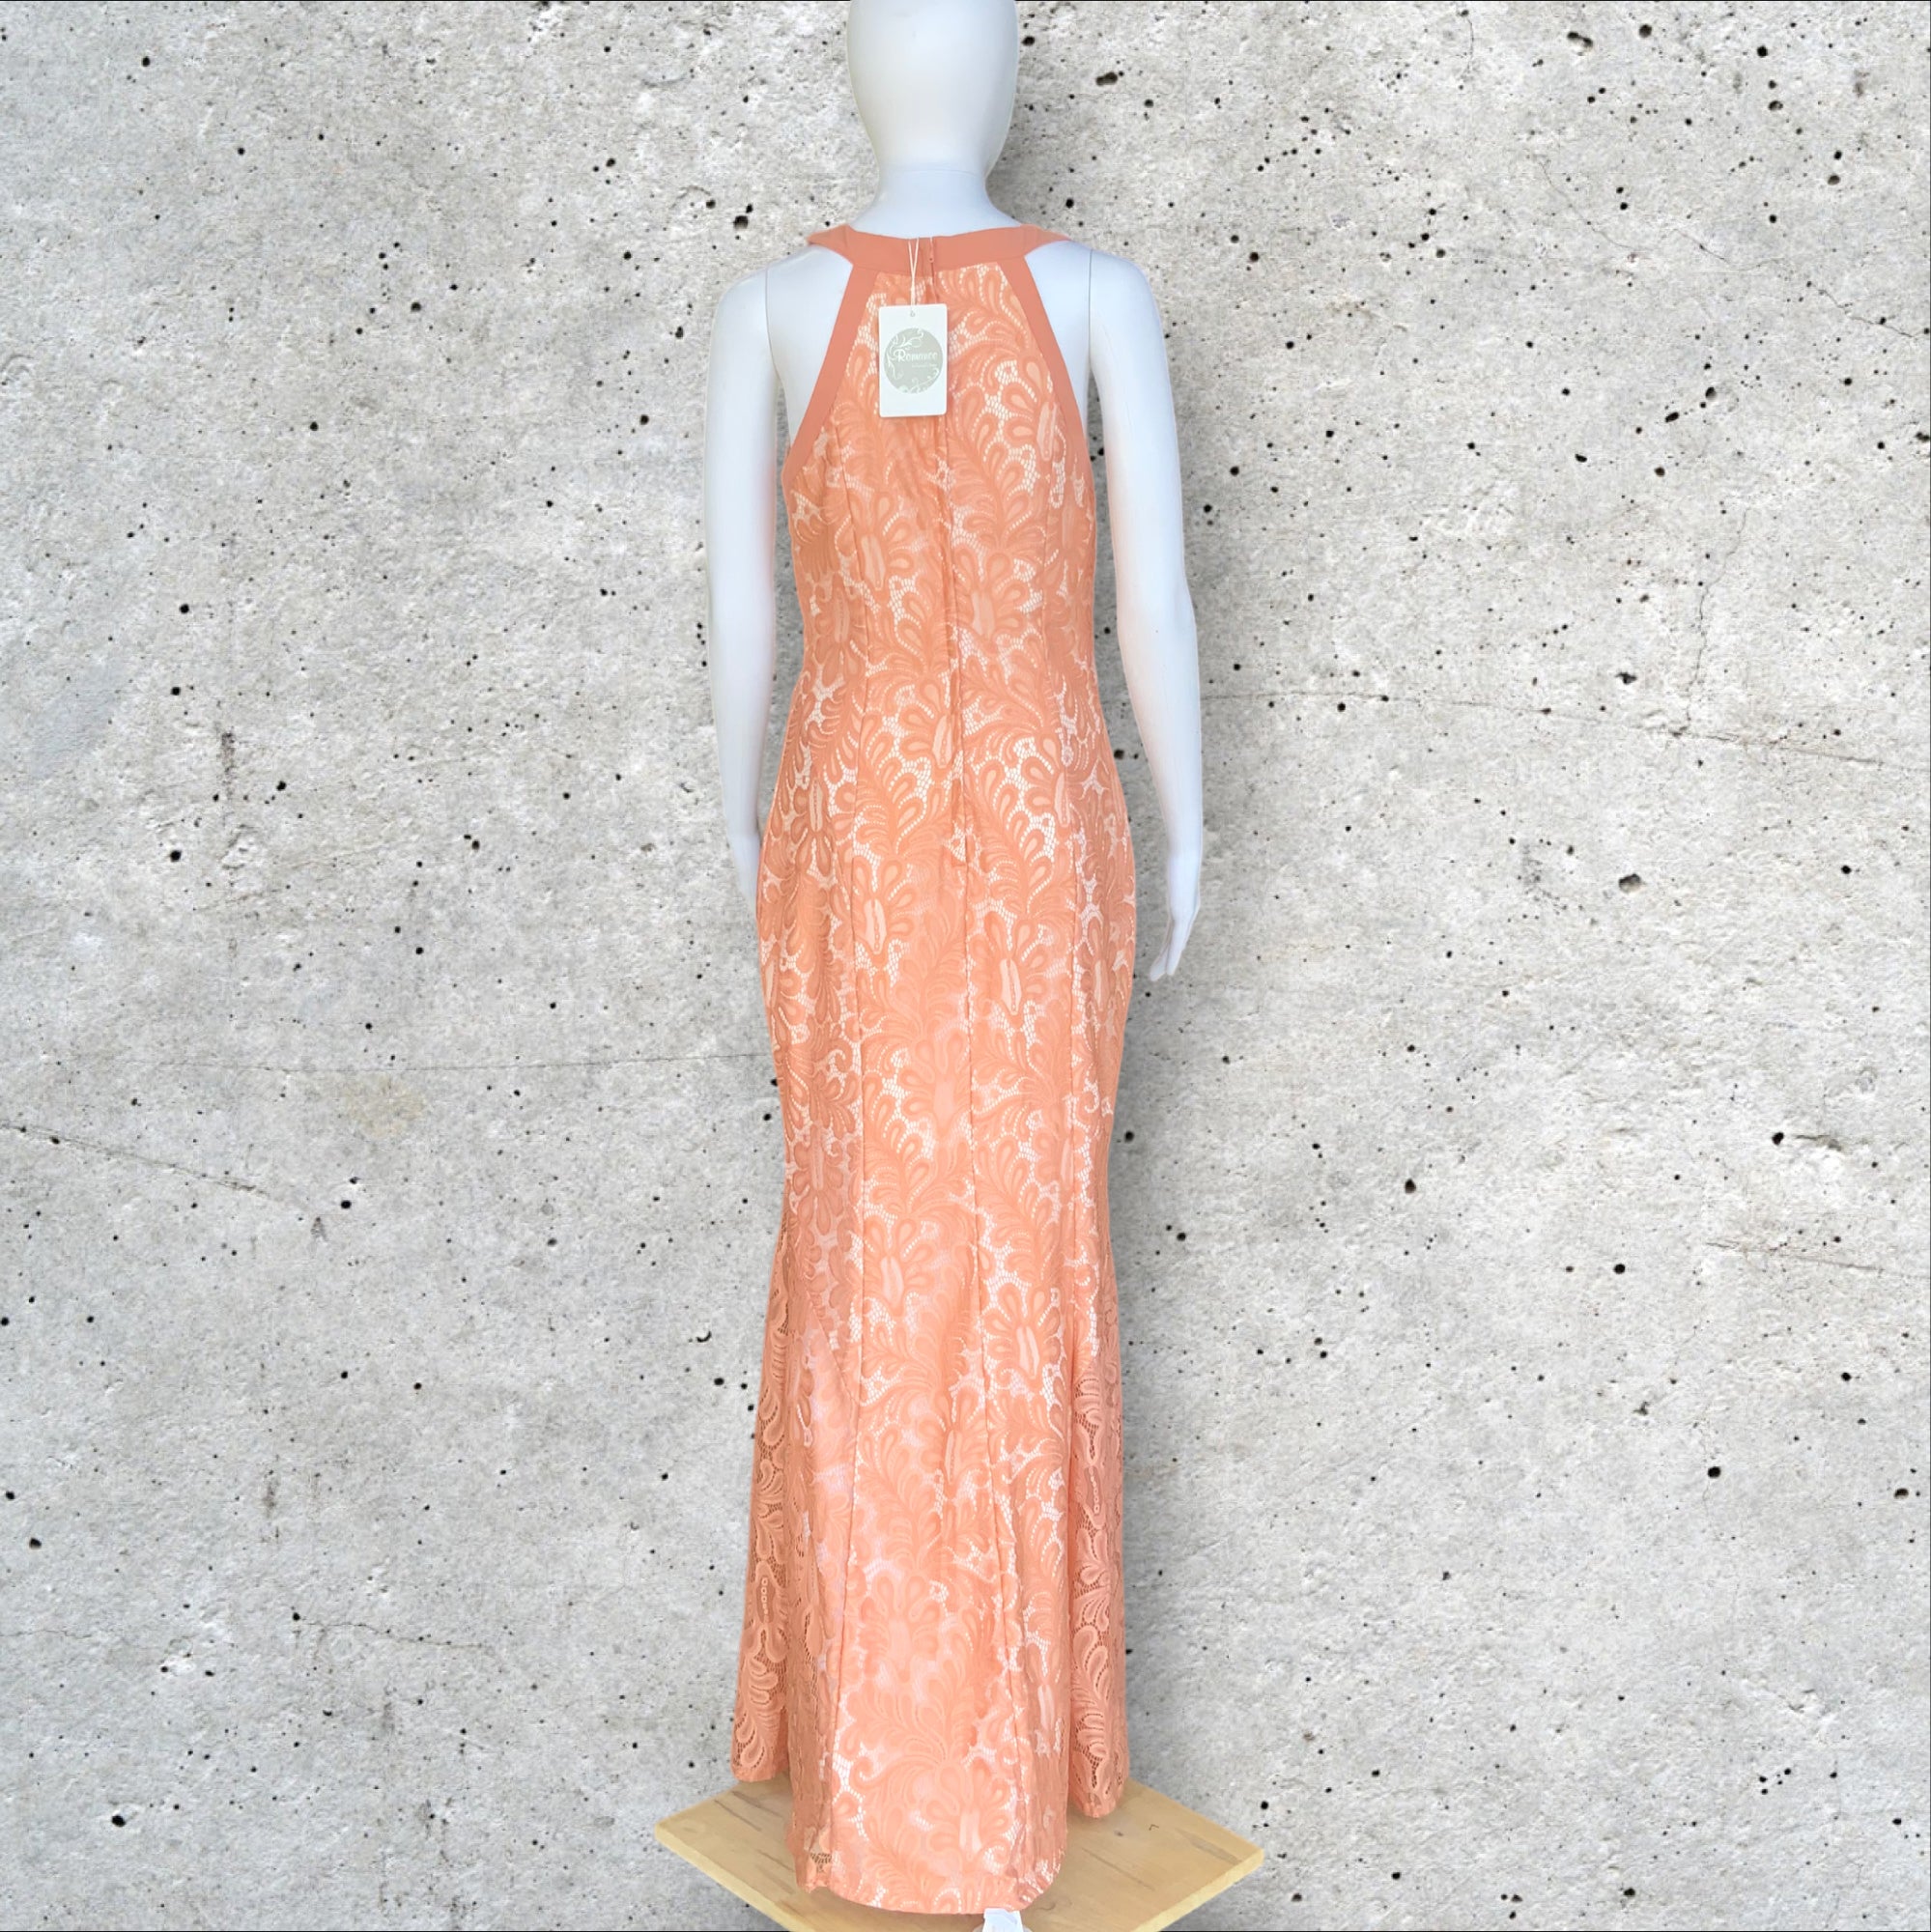 BNWT Romantica by Honey Beau Coral Lace Mermaid Fit Formal Gown - Size 10